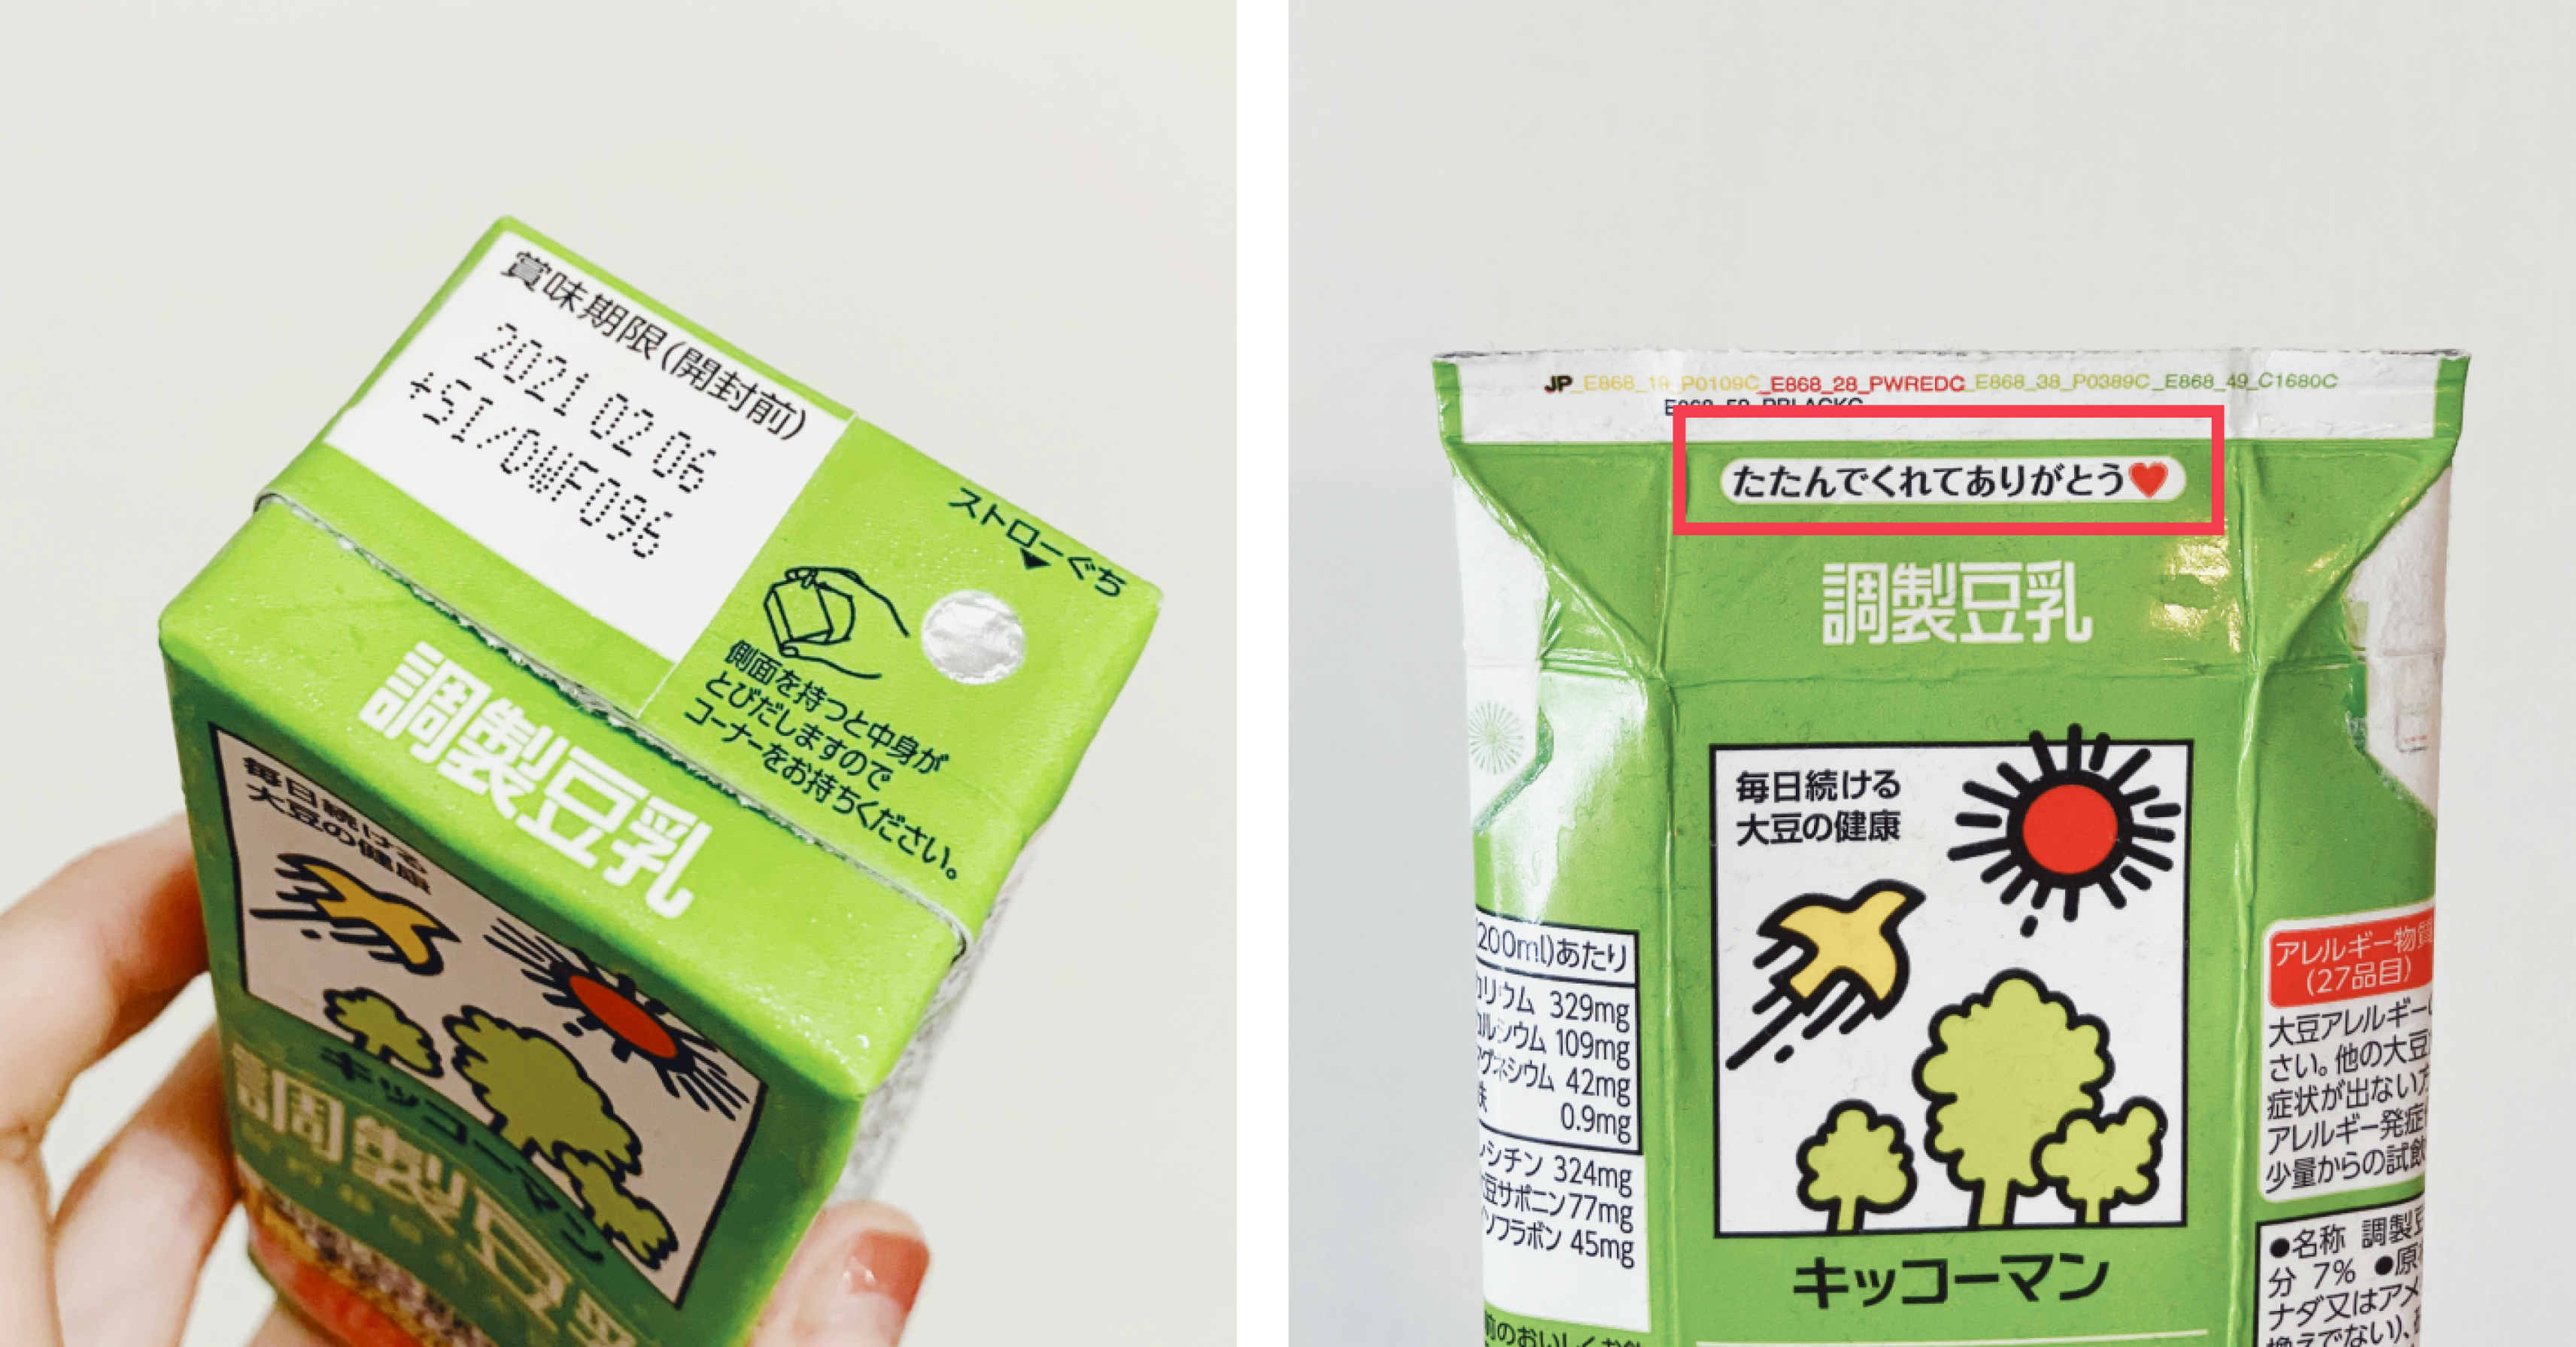 L-R: One: Photograph of a hand holding a Kikkoman soy milk carton. Two: Photograph of a flattened Kikkoman soy milk carton. An illustrated box highlights a piece of text in hiragana script.L-R: One: Photograph of a hand holding a Kikkoman soy milk carton. Two: Photograph of a flattened Kikkoman soy milk carton. An illustrated box highlights a piece of text in hiragana script.